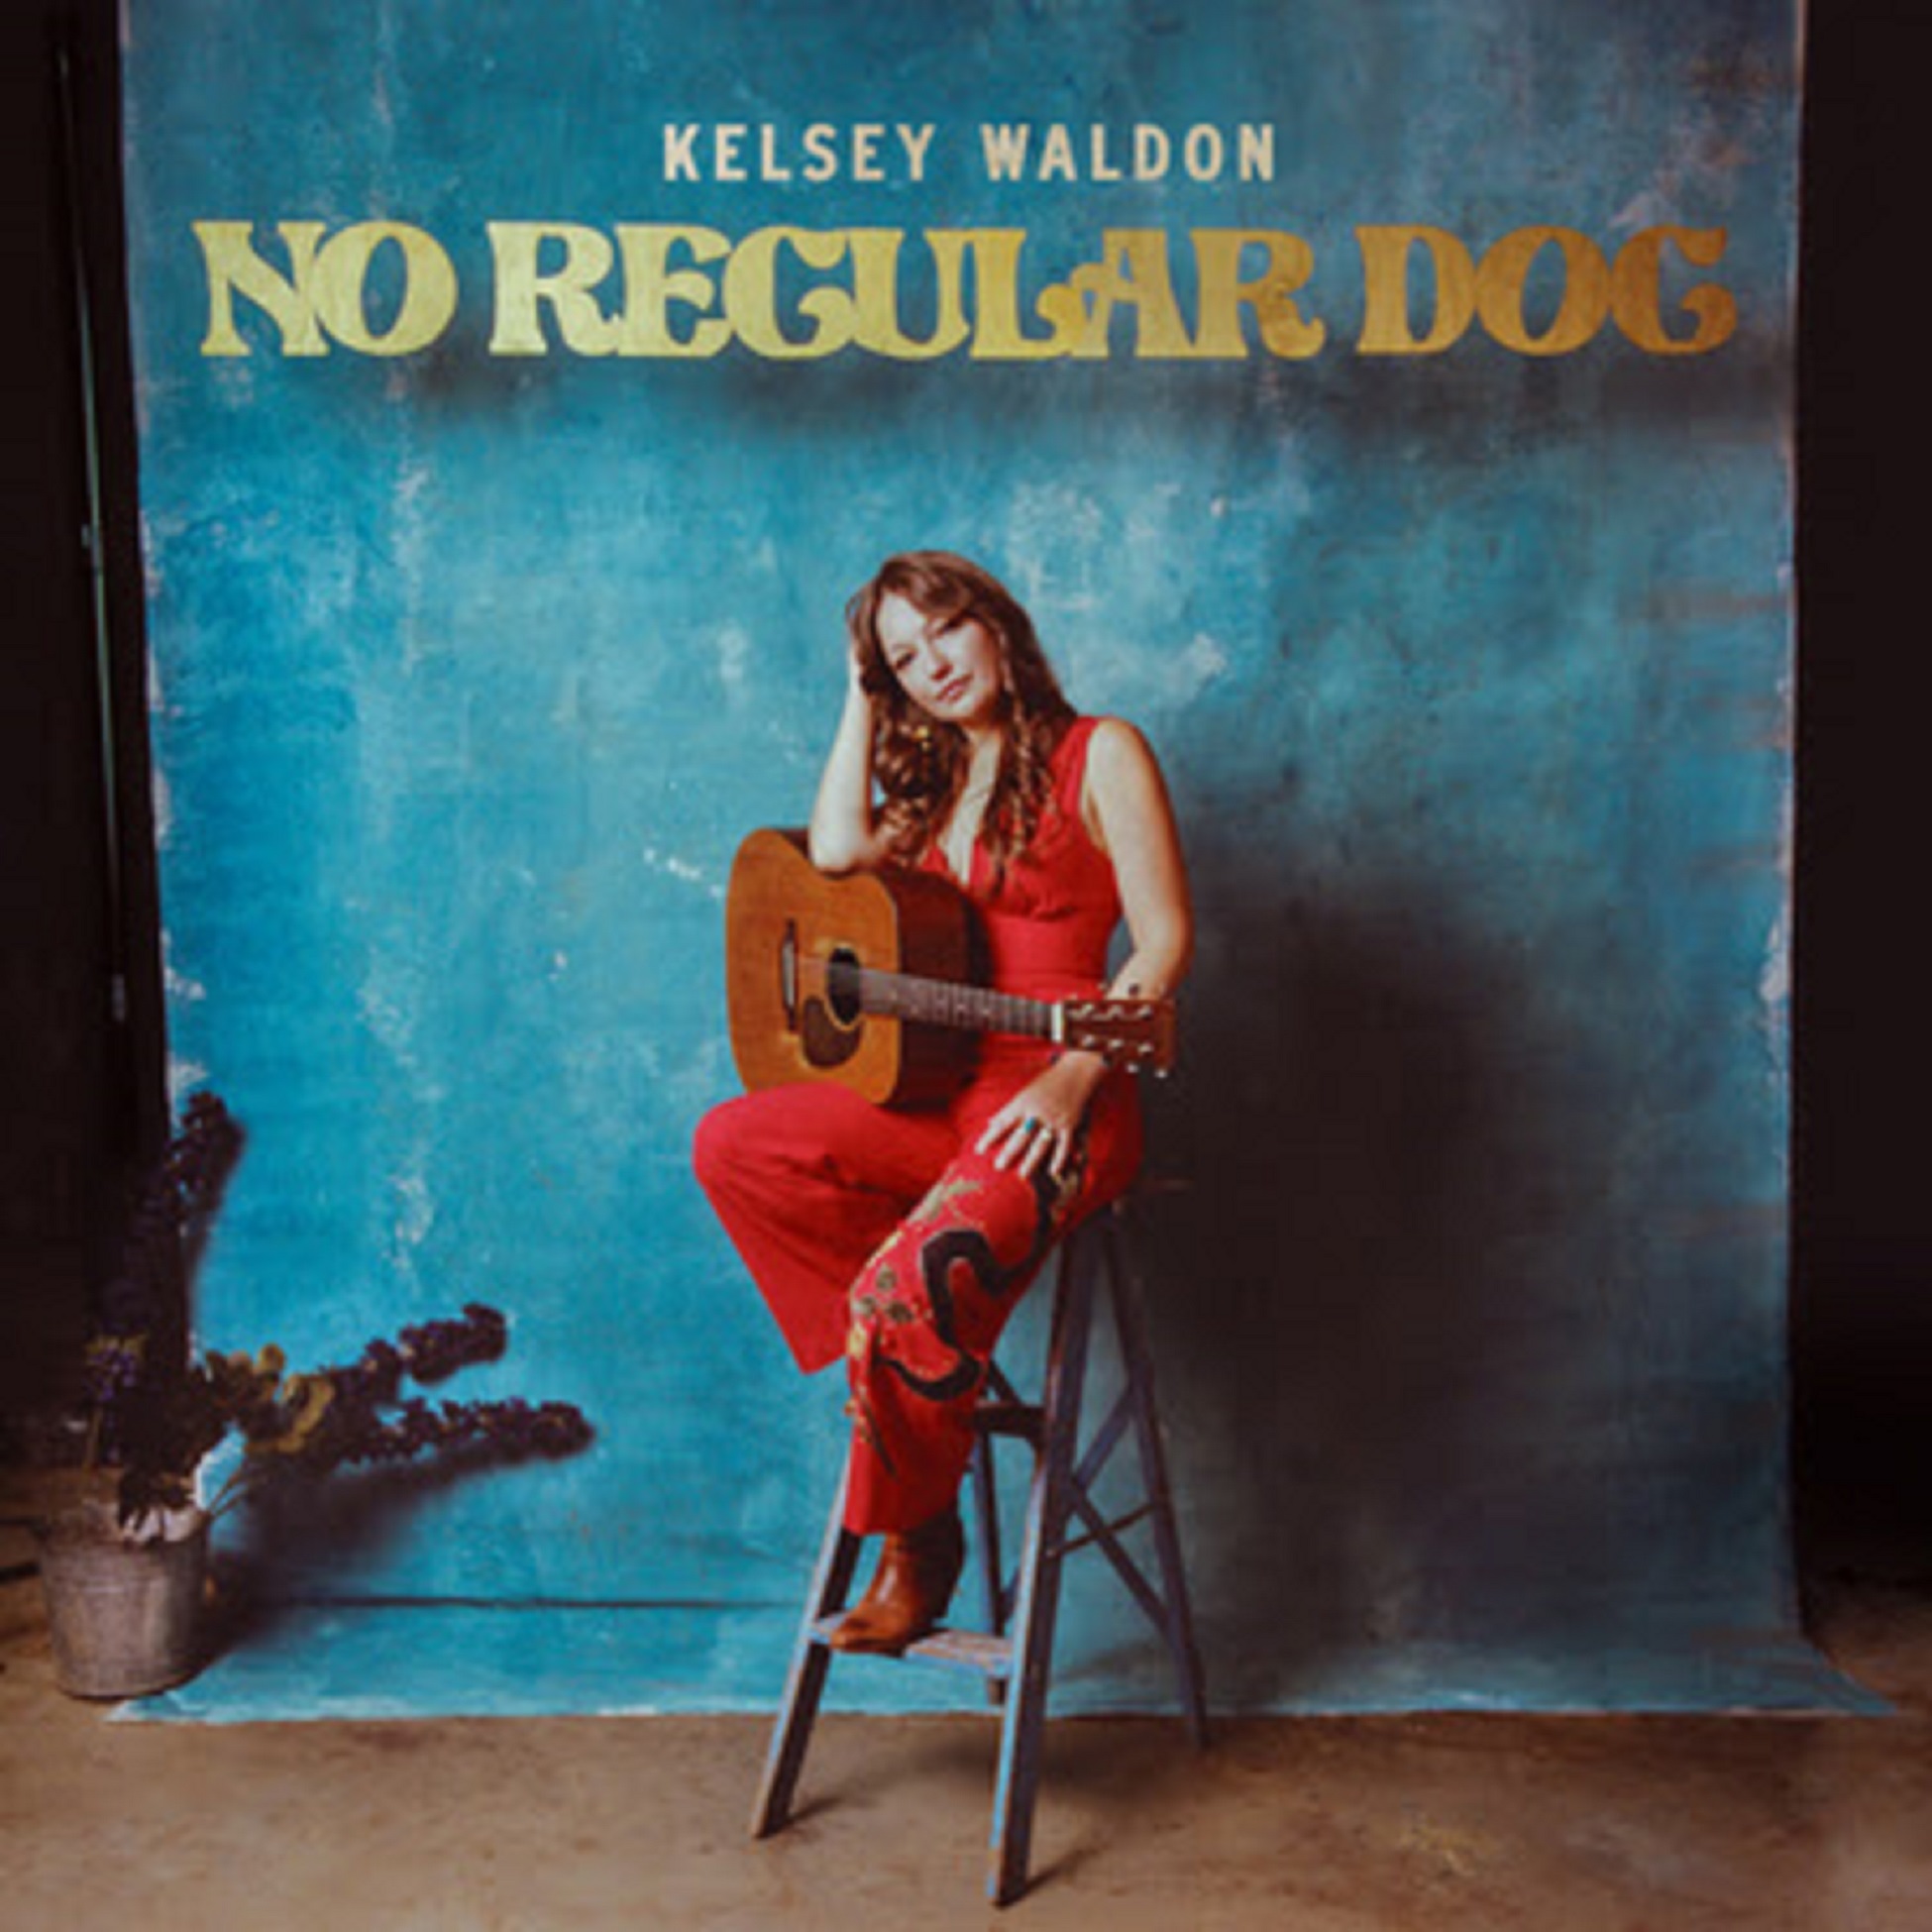 Kelsey Waldon’s new album "No Regular Dog" out August 12, “Sweet Little Girl” debuts today